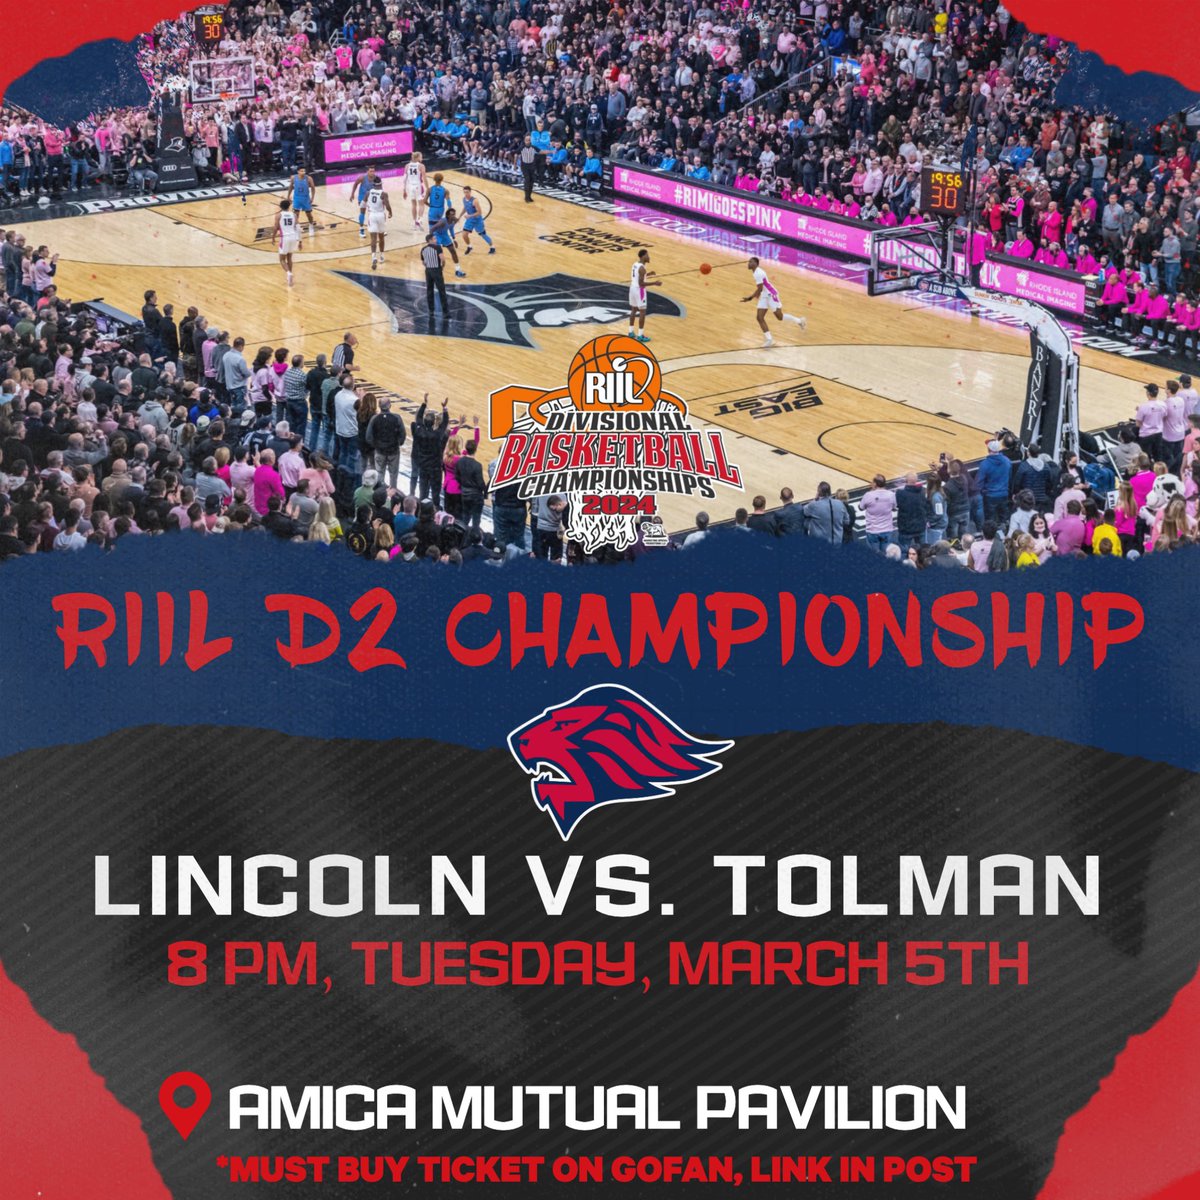 Lions will face Tolman in the D2 State Championship at the AMP! 

⌚️ 8 PM
📅 Tuesday, March 5th
📍Amica Mutual Pavilion 
🎟️ gofan.co/event/1349627

@LHSRI_Athletics | @LHSRI